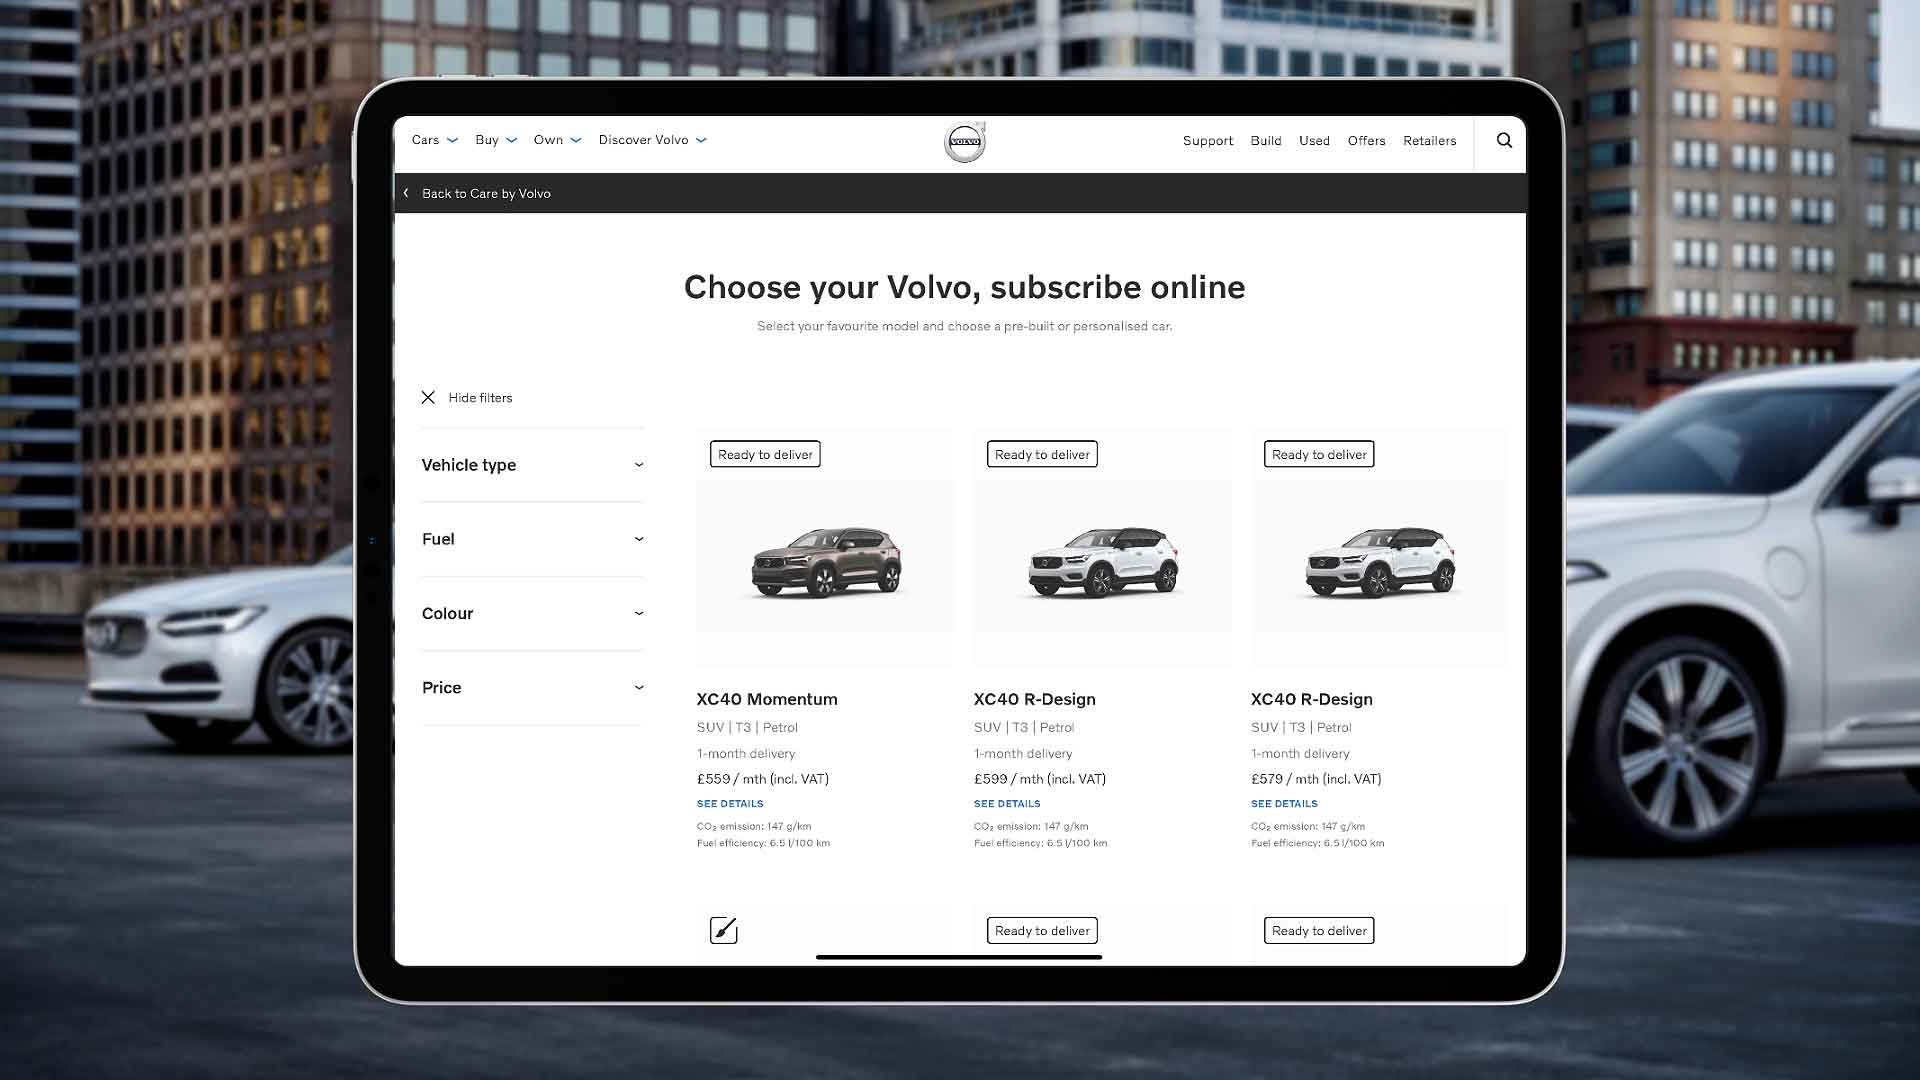 care-by-volvo-car-subscription-service-launched-in-uk